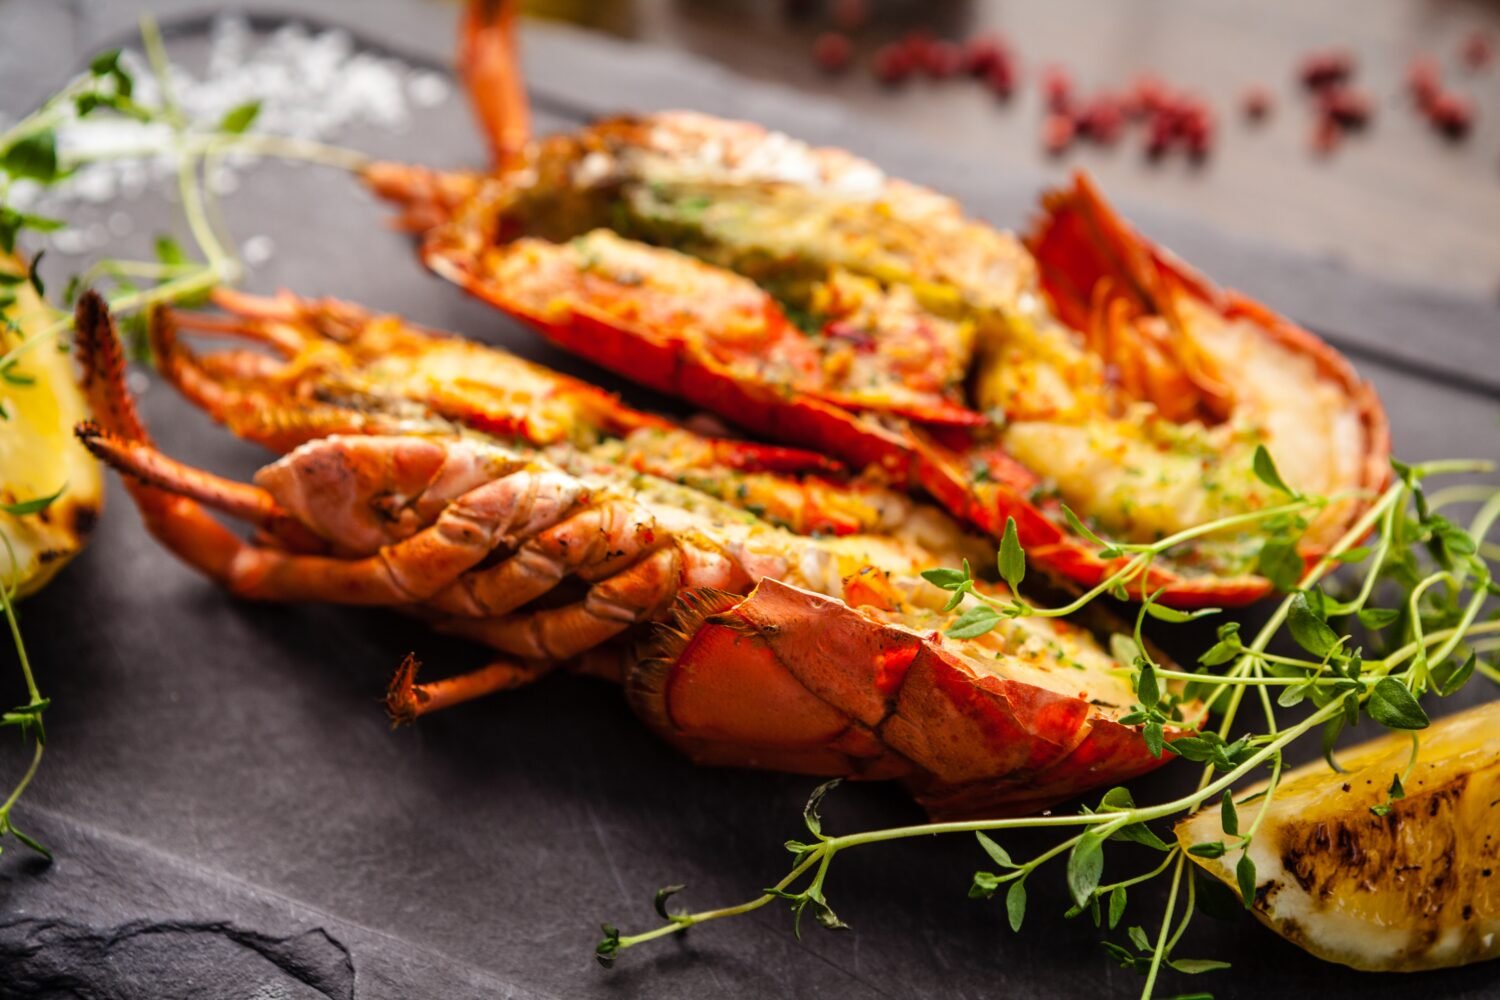 Lobster with flavored butter. Herb butter, lemon. Delicious healthy traditional food closeup served for lunch in modern gourmet cuisine restaurant